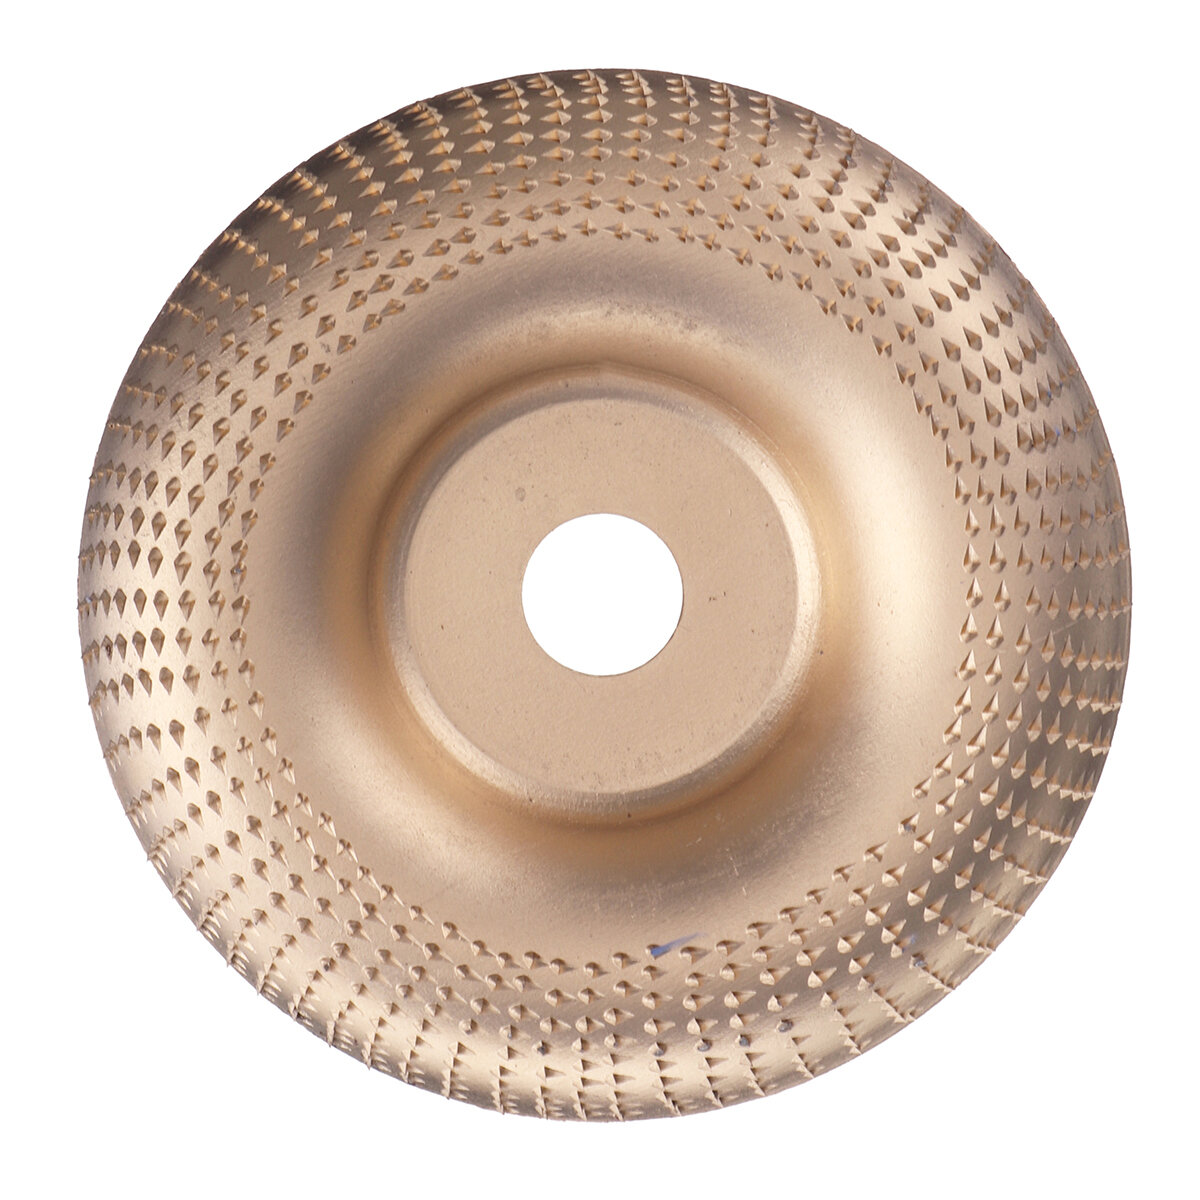 

100mm Wood Sanding Carving Shaping Disc Grinding Wheel For Angle Grinder